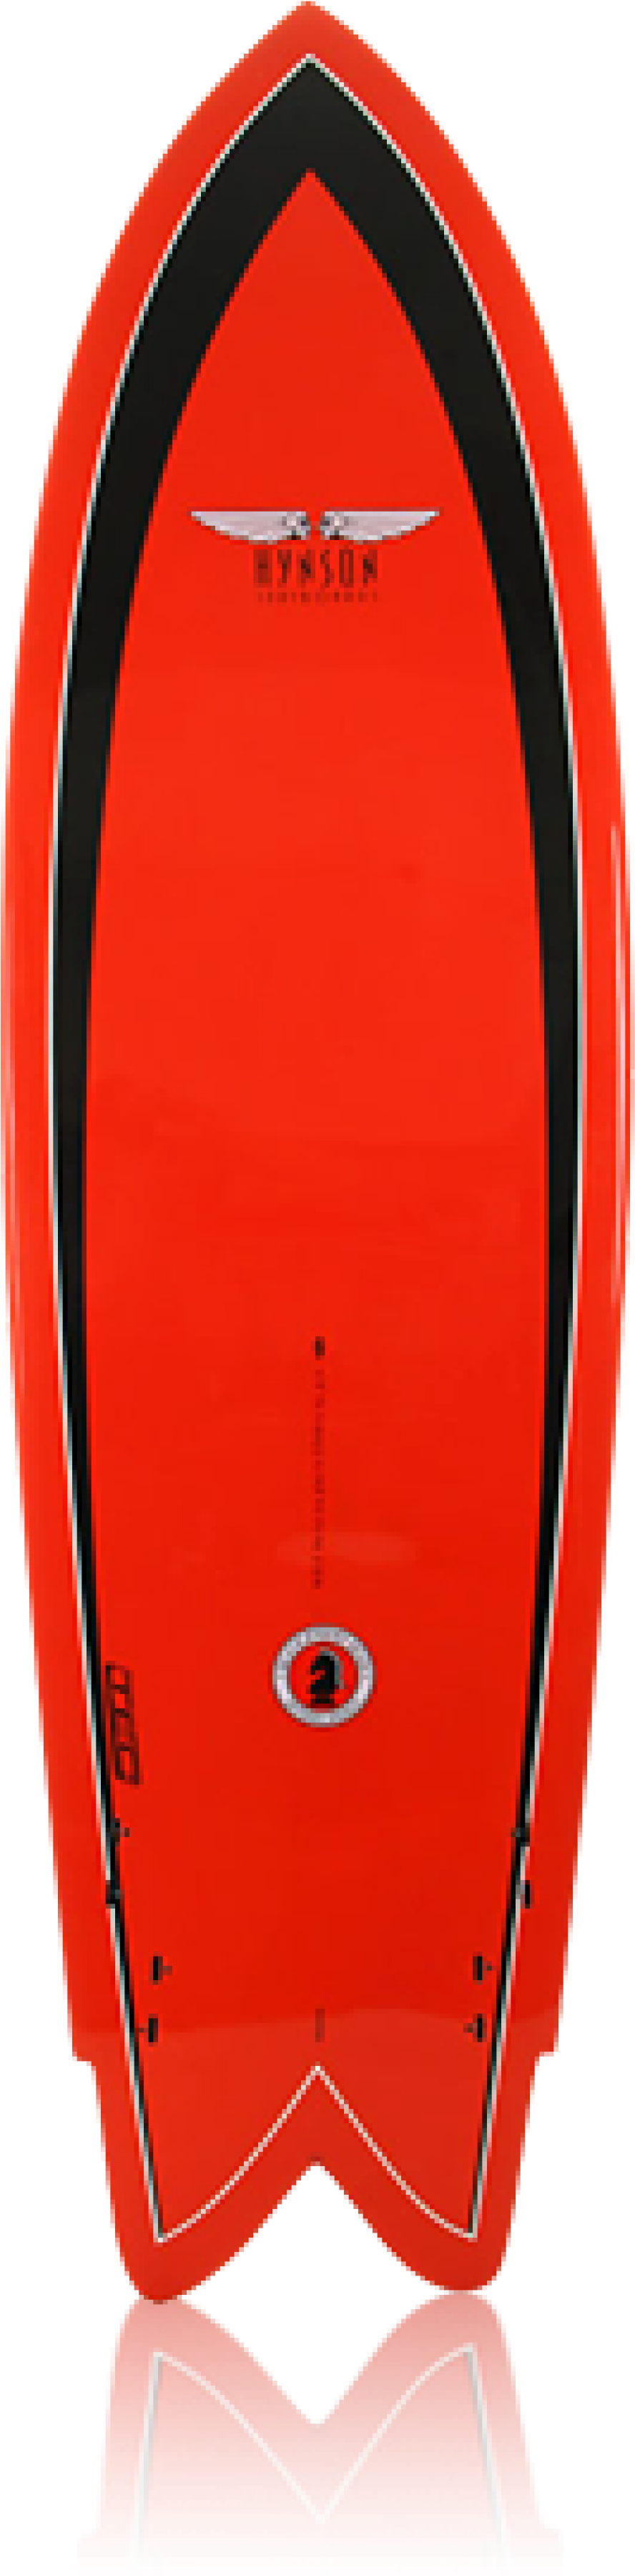 A Red Surfboard With Black Stripes